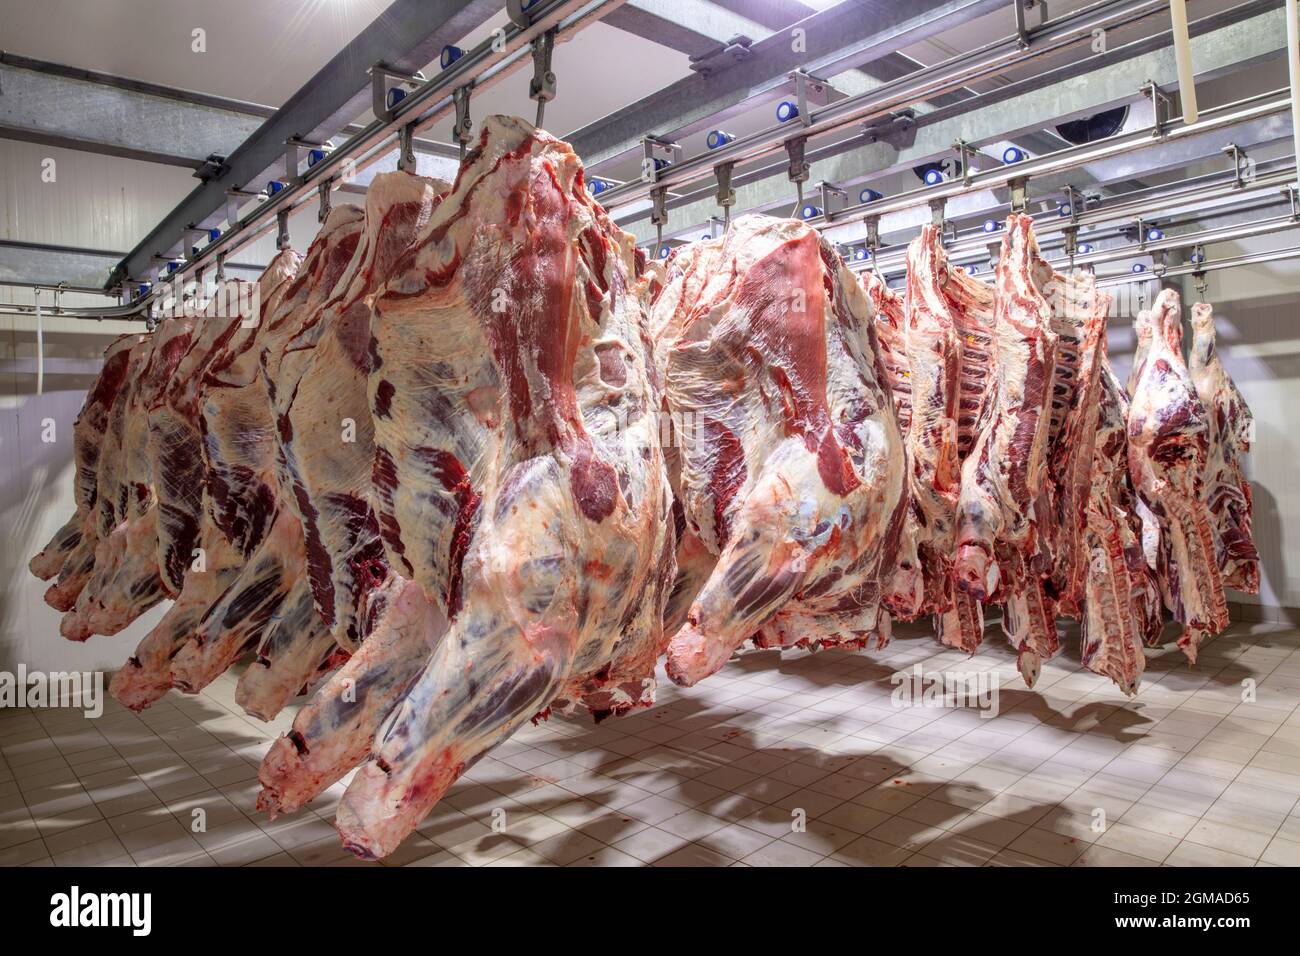 At The Slaughterhouse Carcasses Raw Meat Beef Hooked In The Freezer Close  Up Of A Half Cow Chunks Fresh Hung And Arranged In A Row In A Large Fridge  In The Fridge